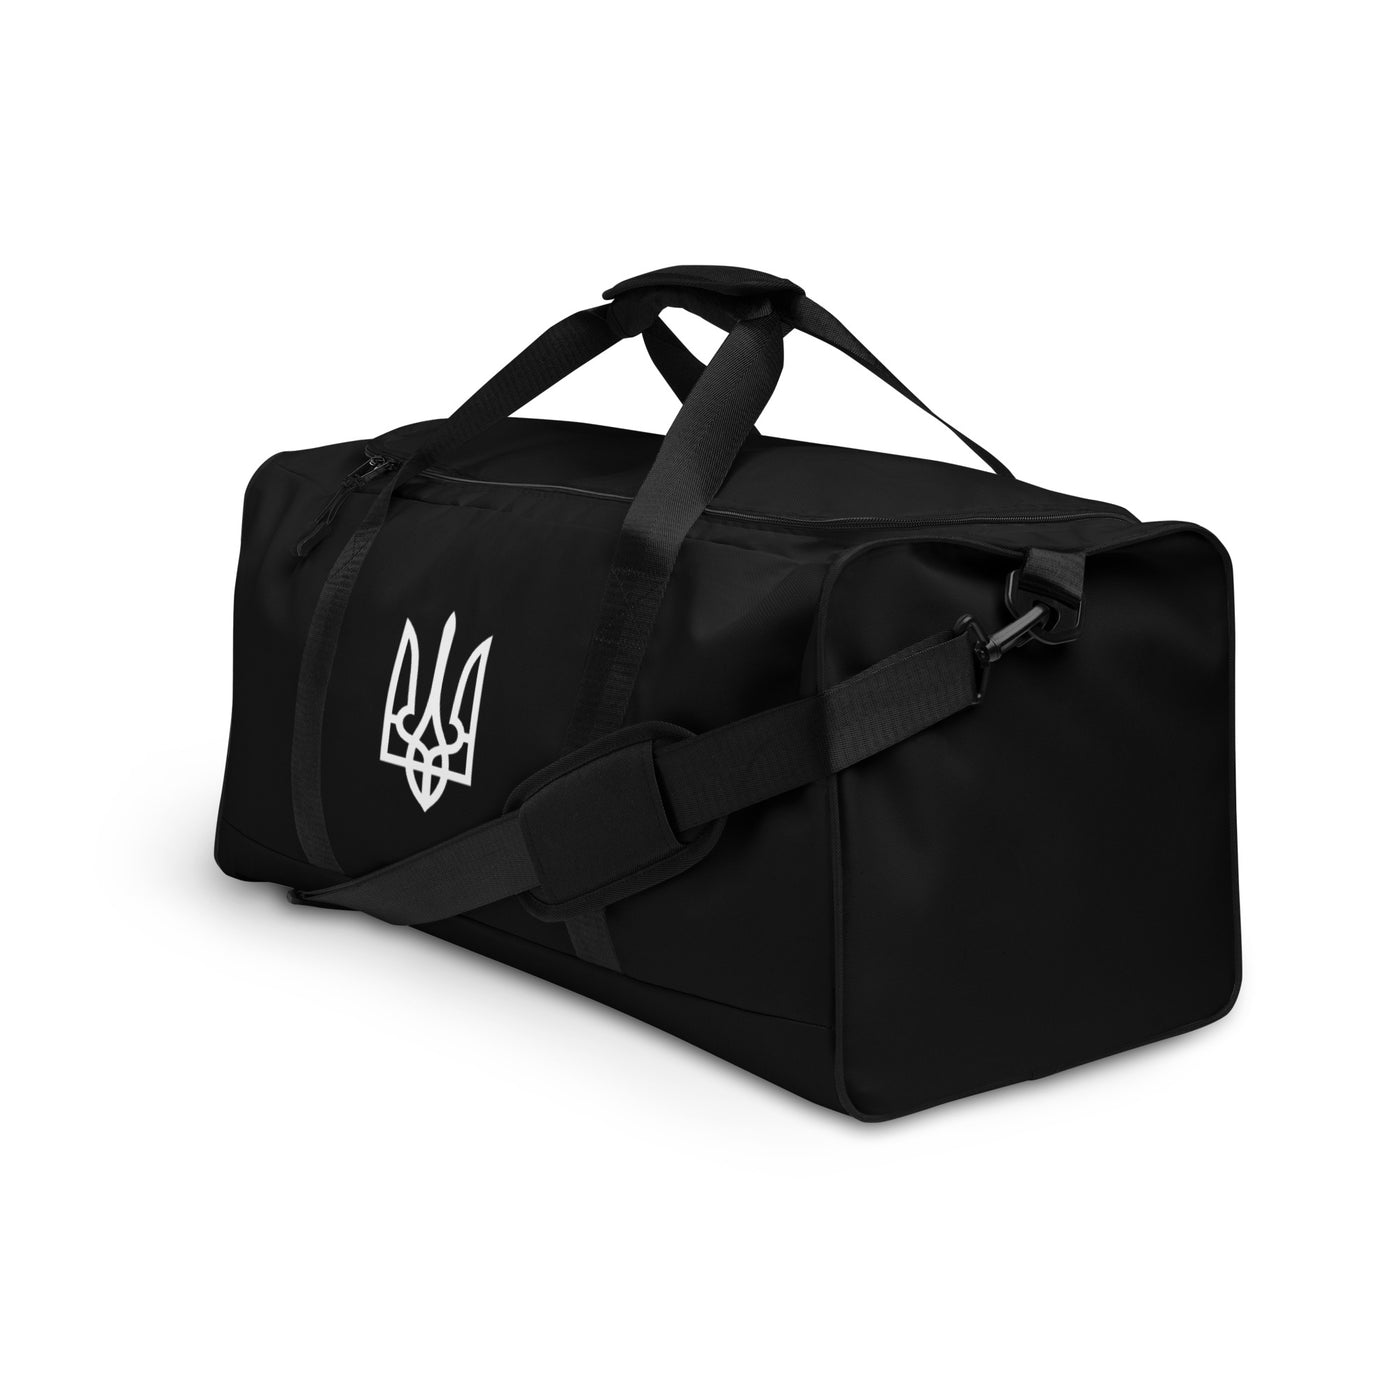 Trident of Freedom Duffle Bag